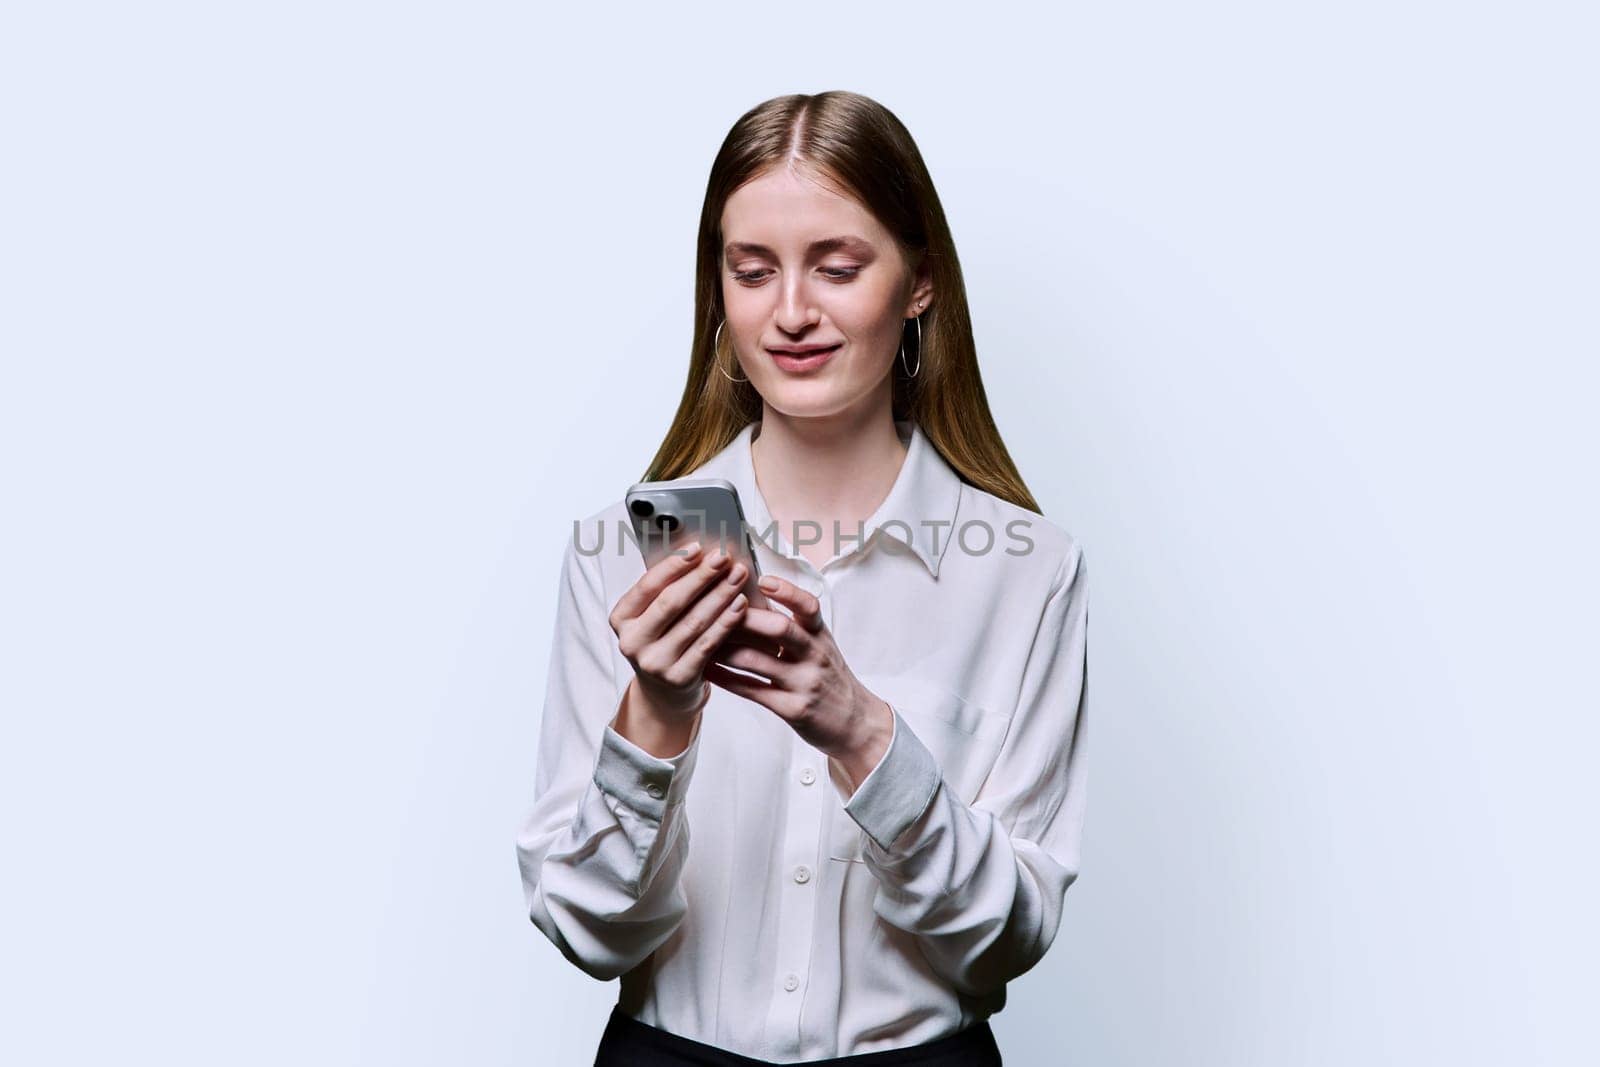 Teenage student girl 16, 17, 18 years old in white shirt holding smartphone in hands, texting looking at screen on white studio background. Education technology high school college lifestyle youth